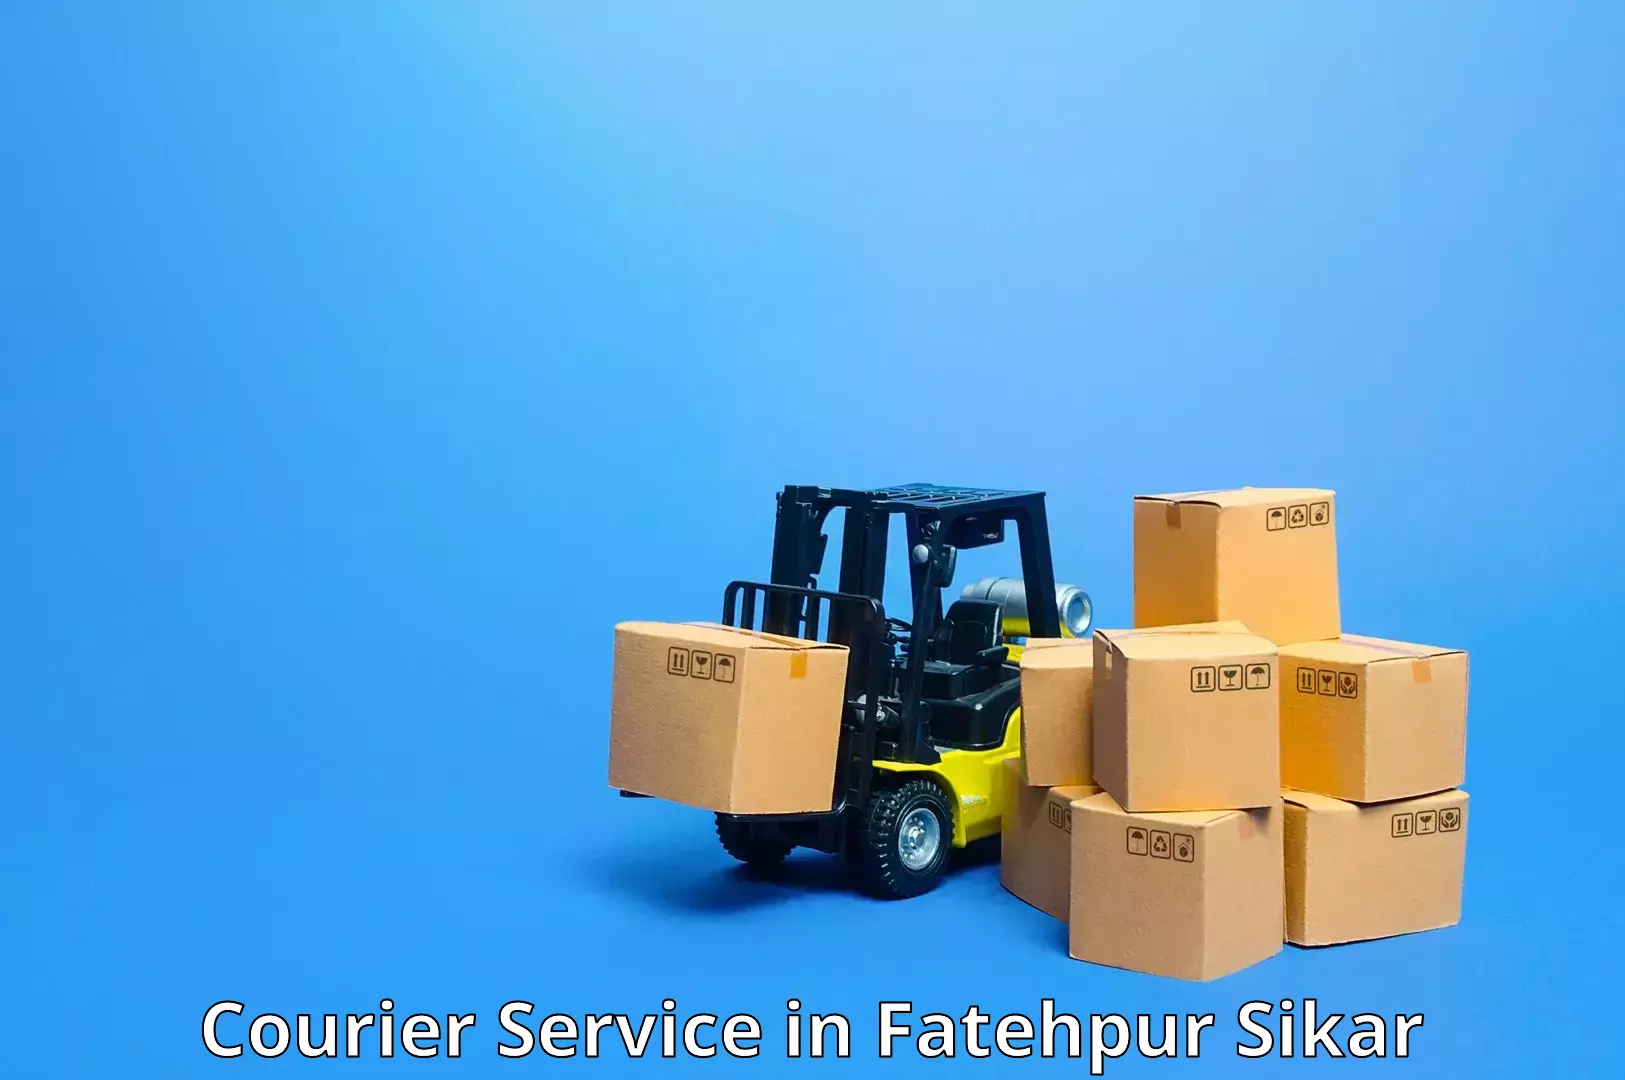 Next-generation courier services in Fatehpur Sikar